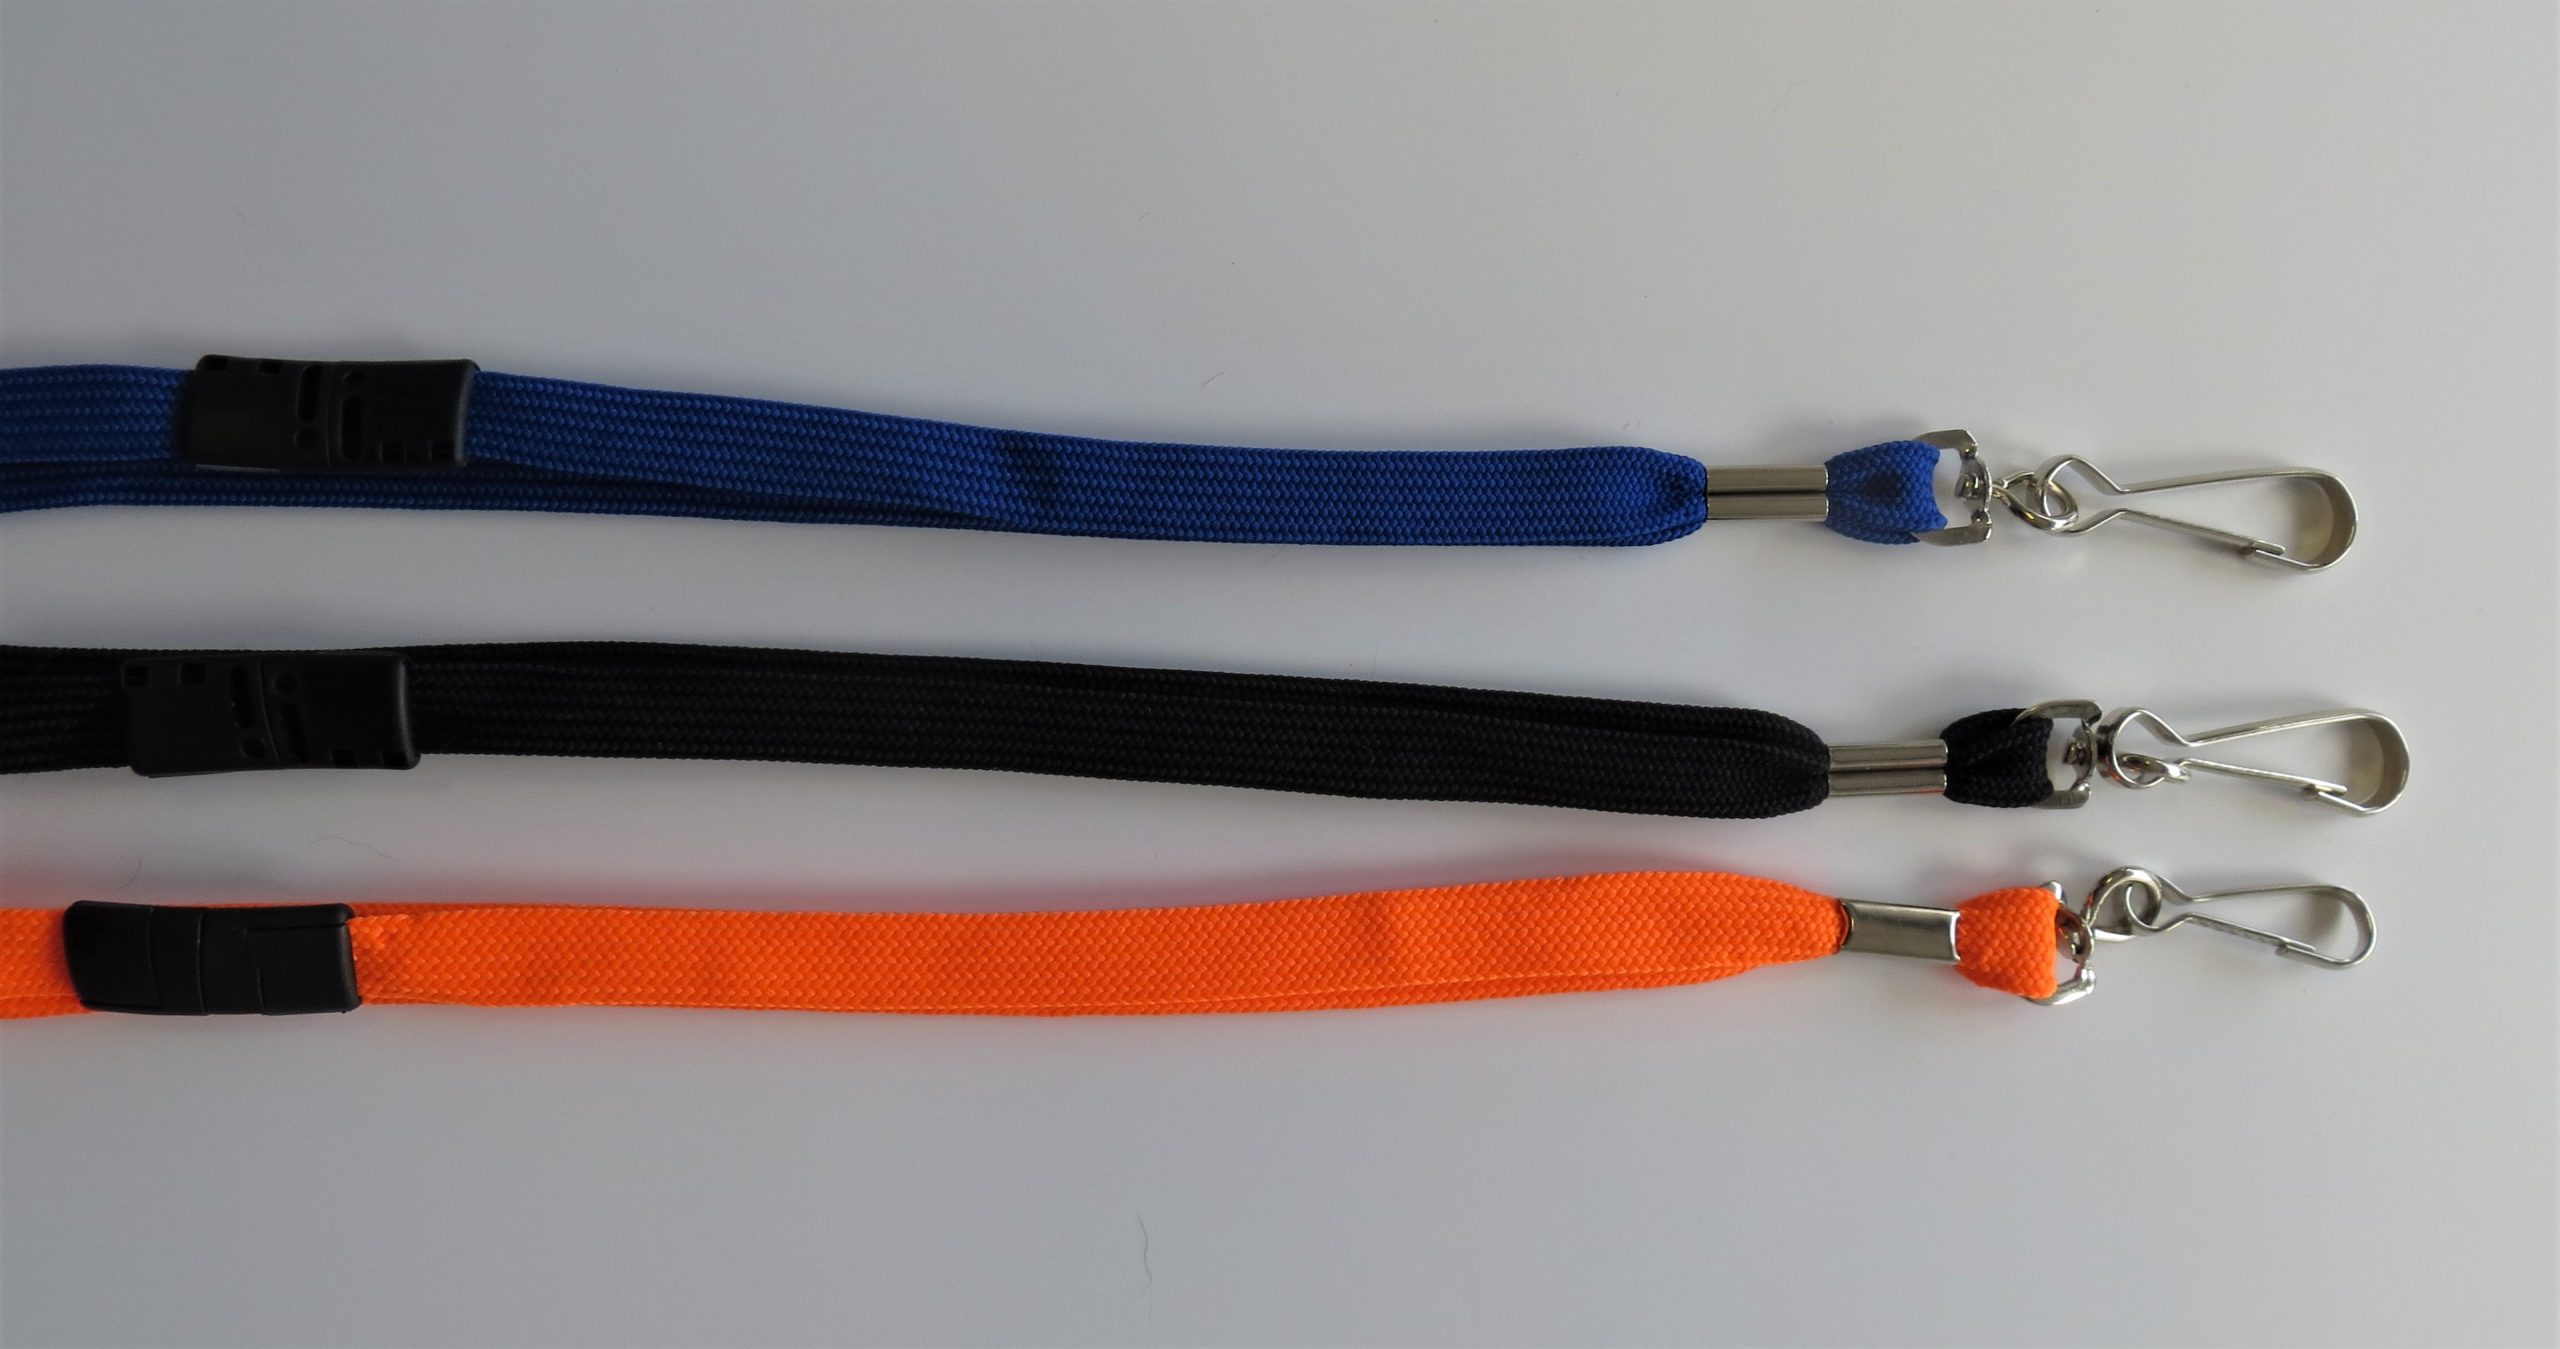 https://www.allcard.co.nz/wp-content/uploads/2020/08/42.-Flat-Lanyard-with-Breakaway-and-Swivel-Clip-Various-Colours-scaled.jpg